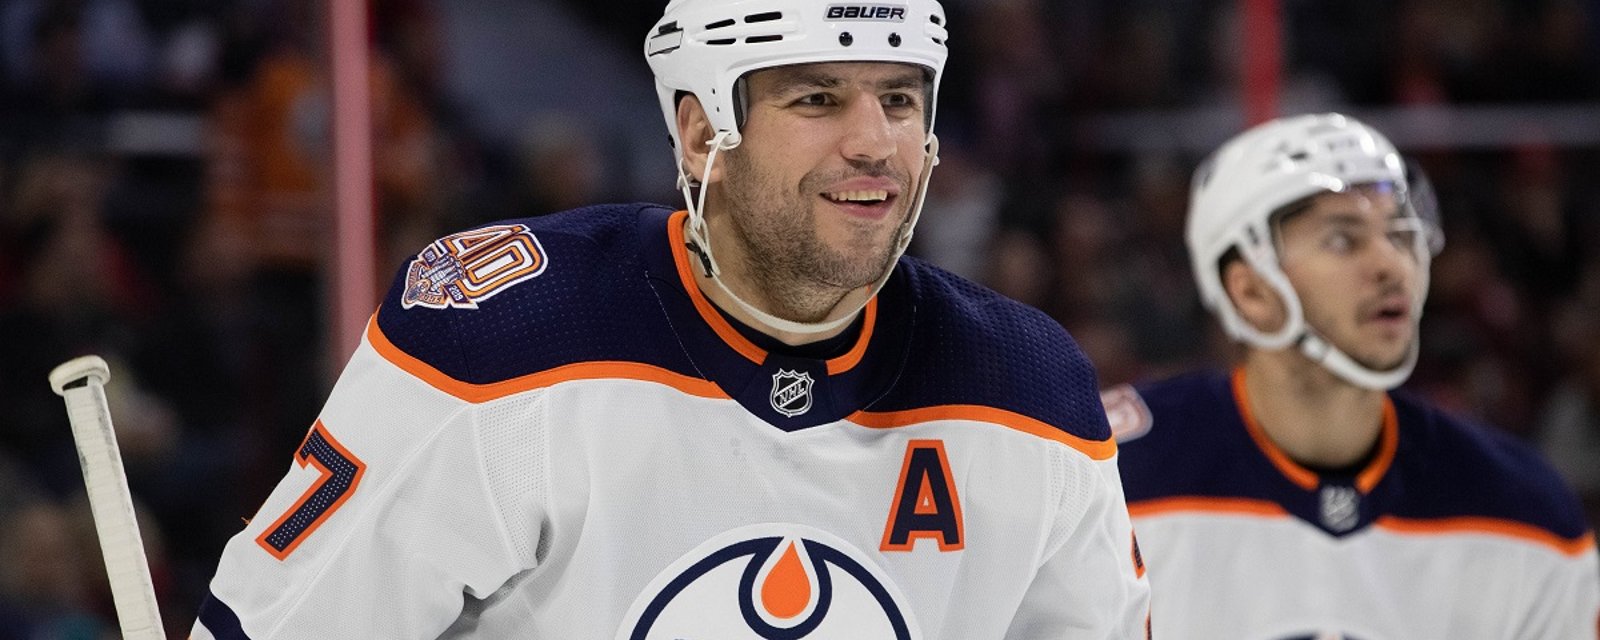 Dreger: The Vancouver Canucks do see value in Milan Lucic.